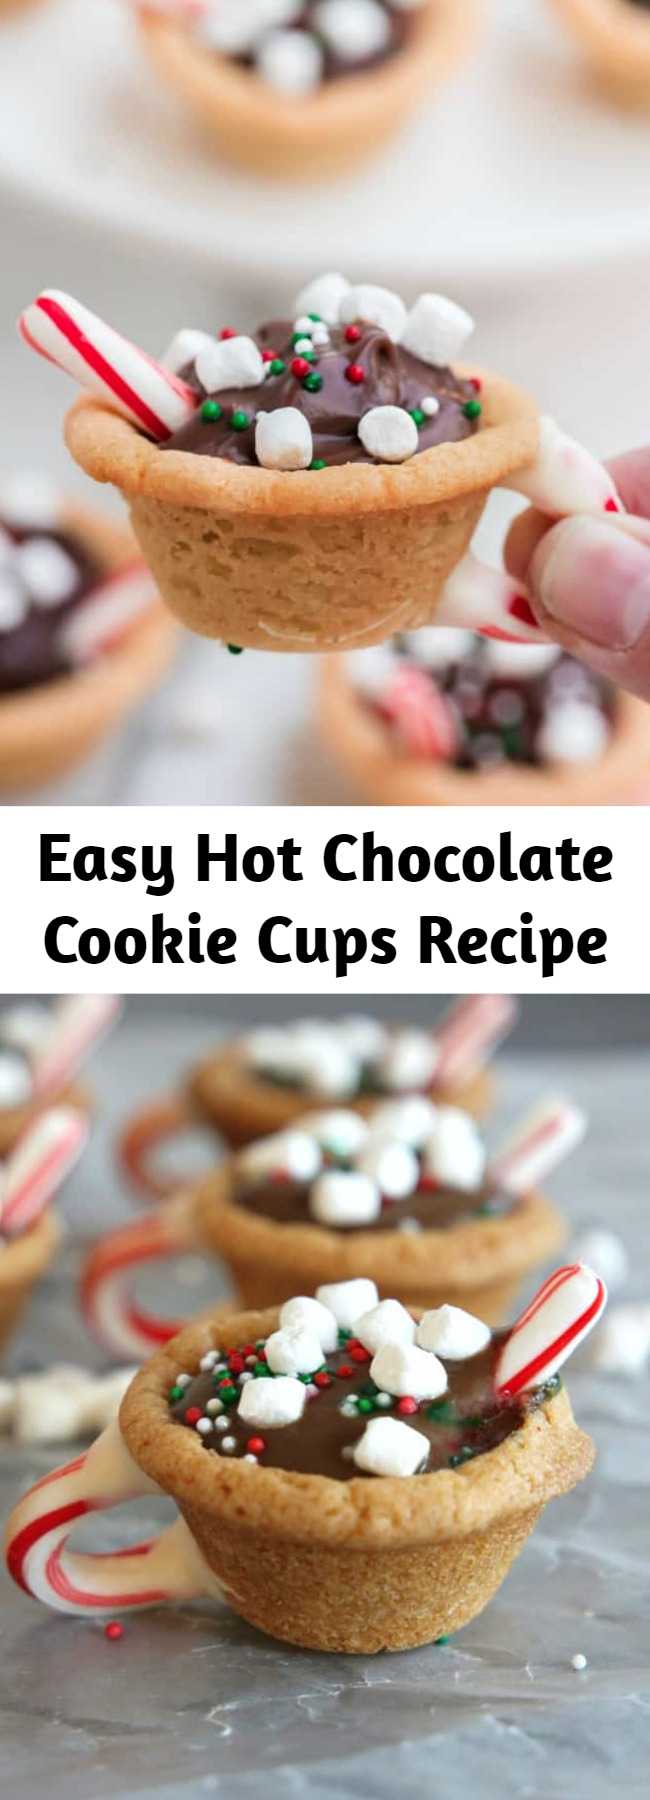 Easy Hot Chocolate Cookie Cups Recipe - These Hot Chocolate Cookie Cups are made with ready to bake sugar cookie dough and pudding cups! So easy to make and they are a super fun holiday dessert and are perfect for Christmas parties, cookie exchanges or just to put a smile on someone’s face!